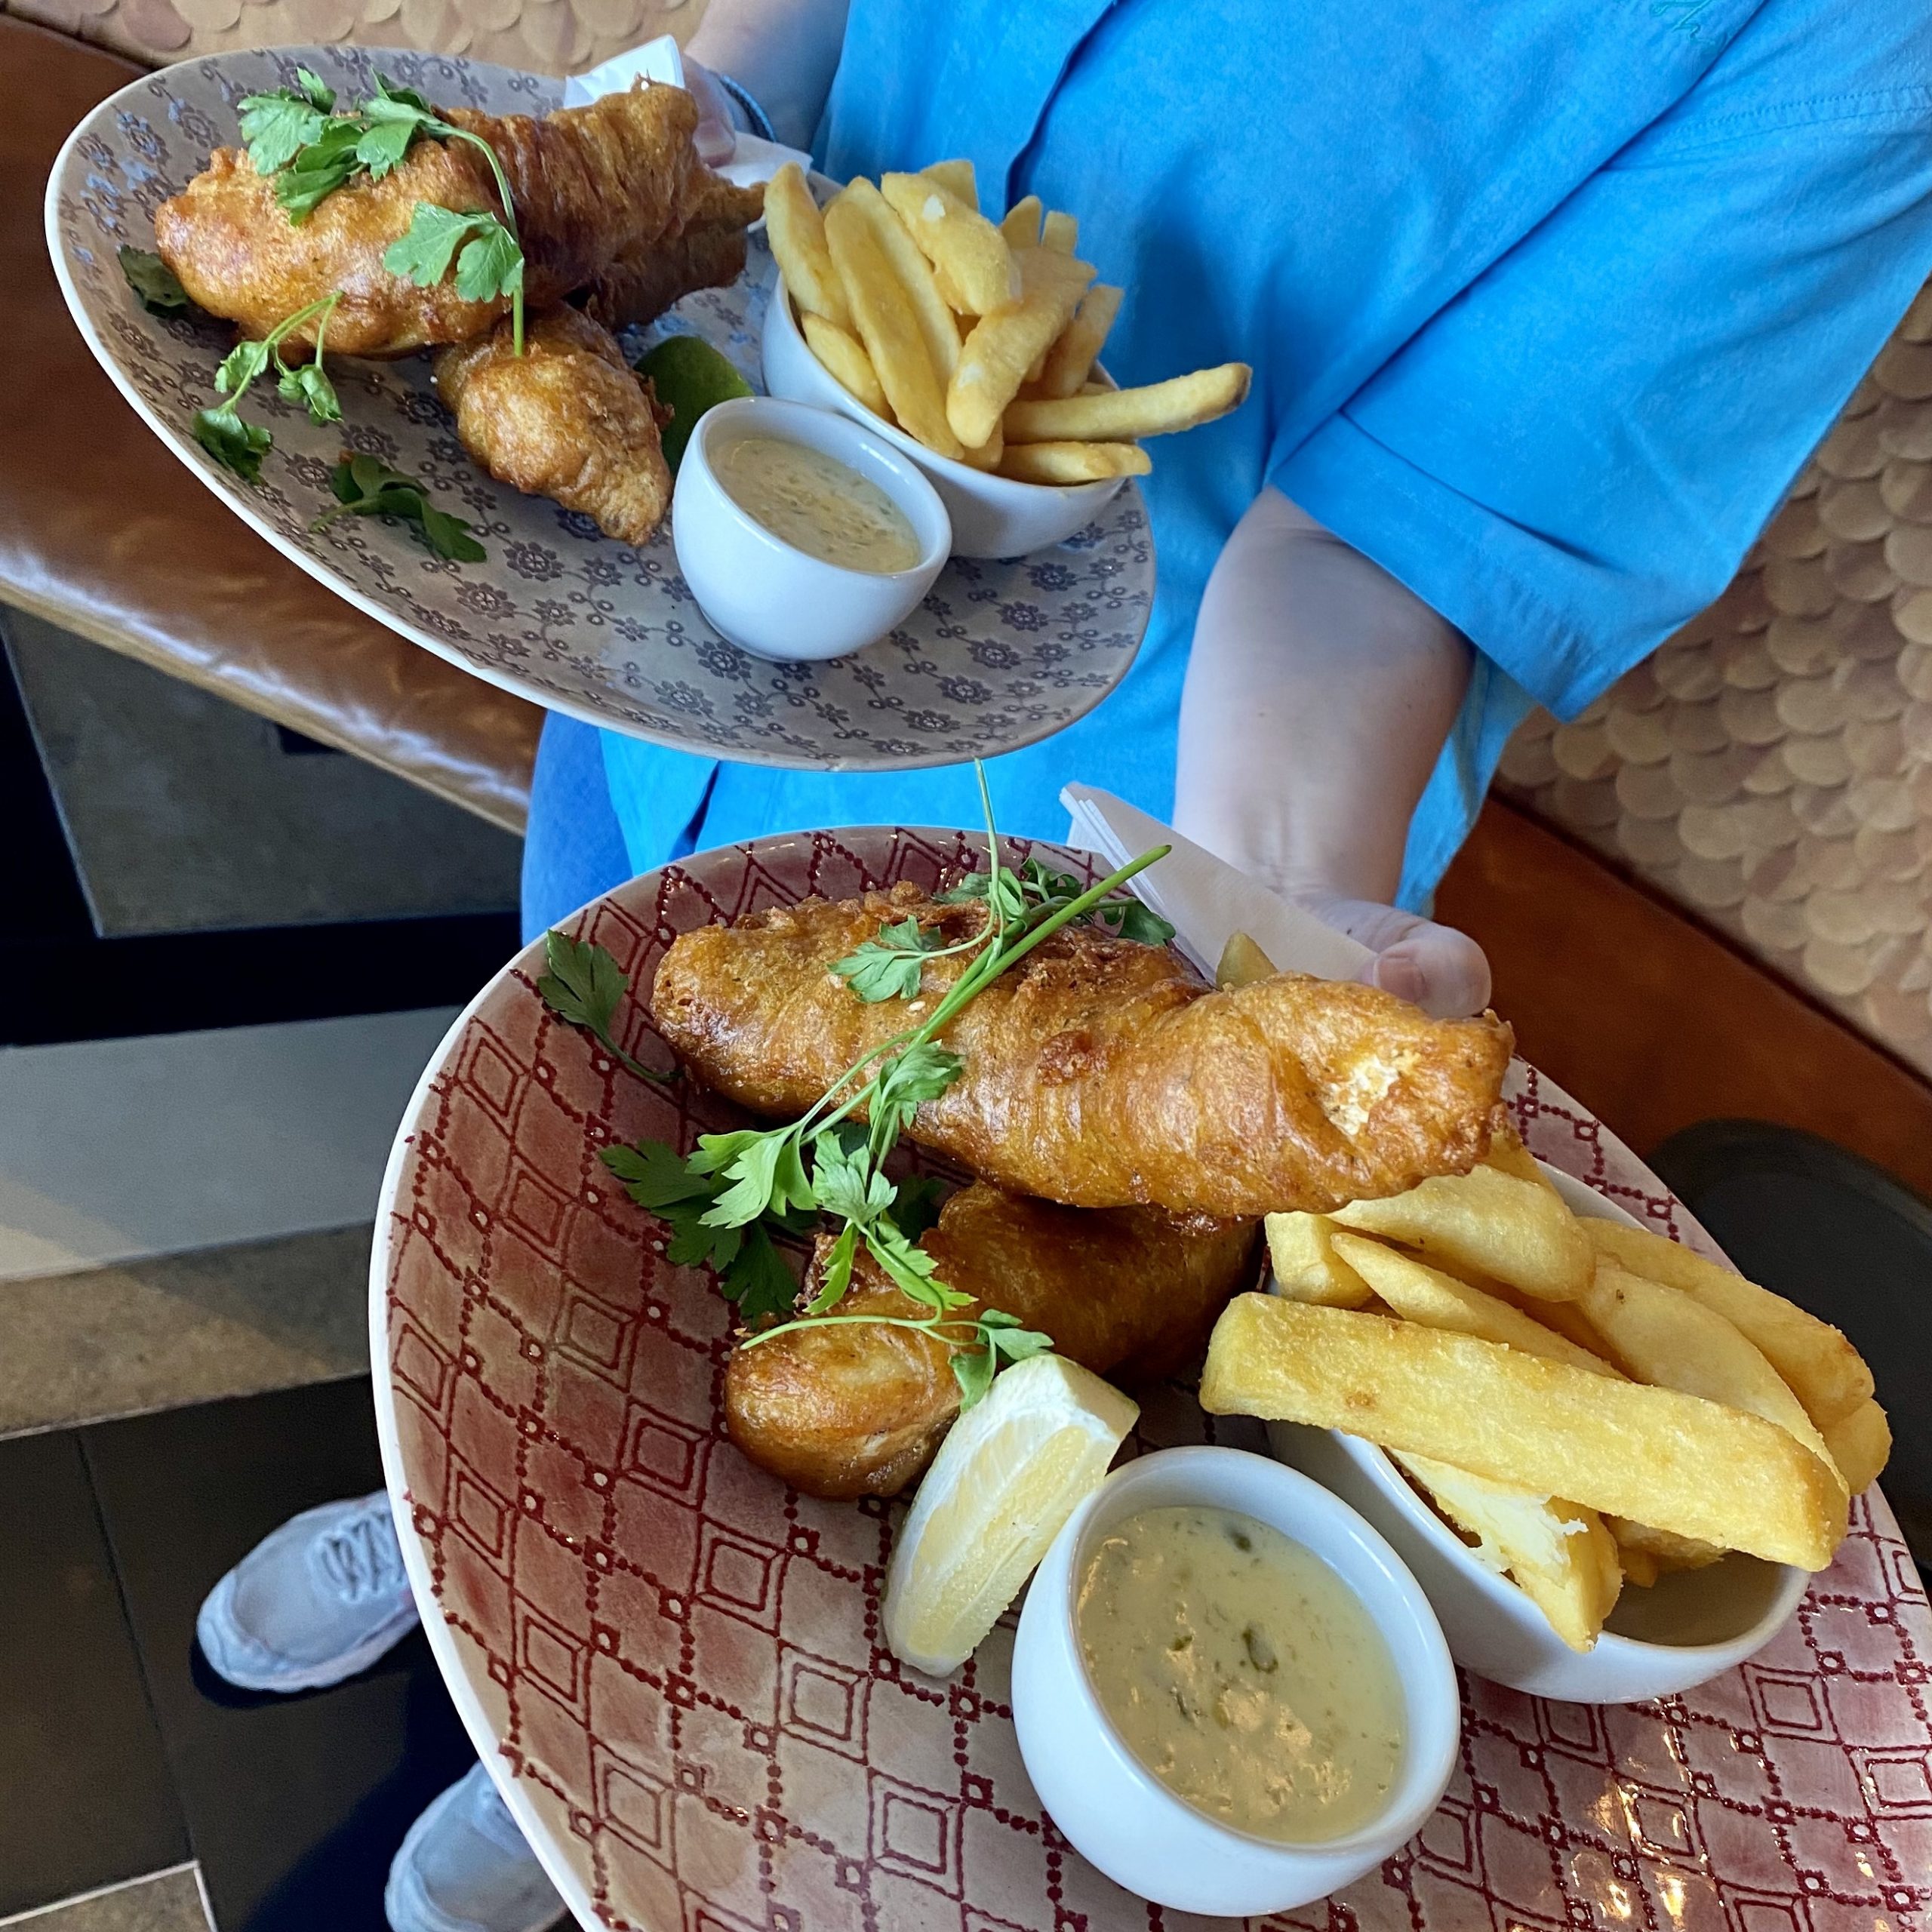 Fat Fish and Chips for R150